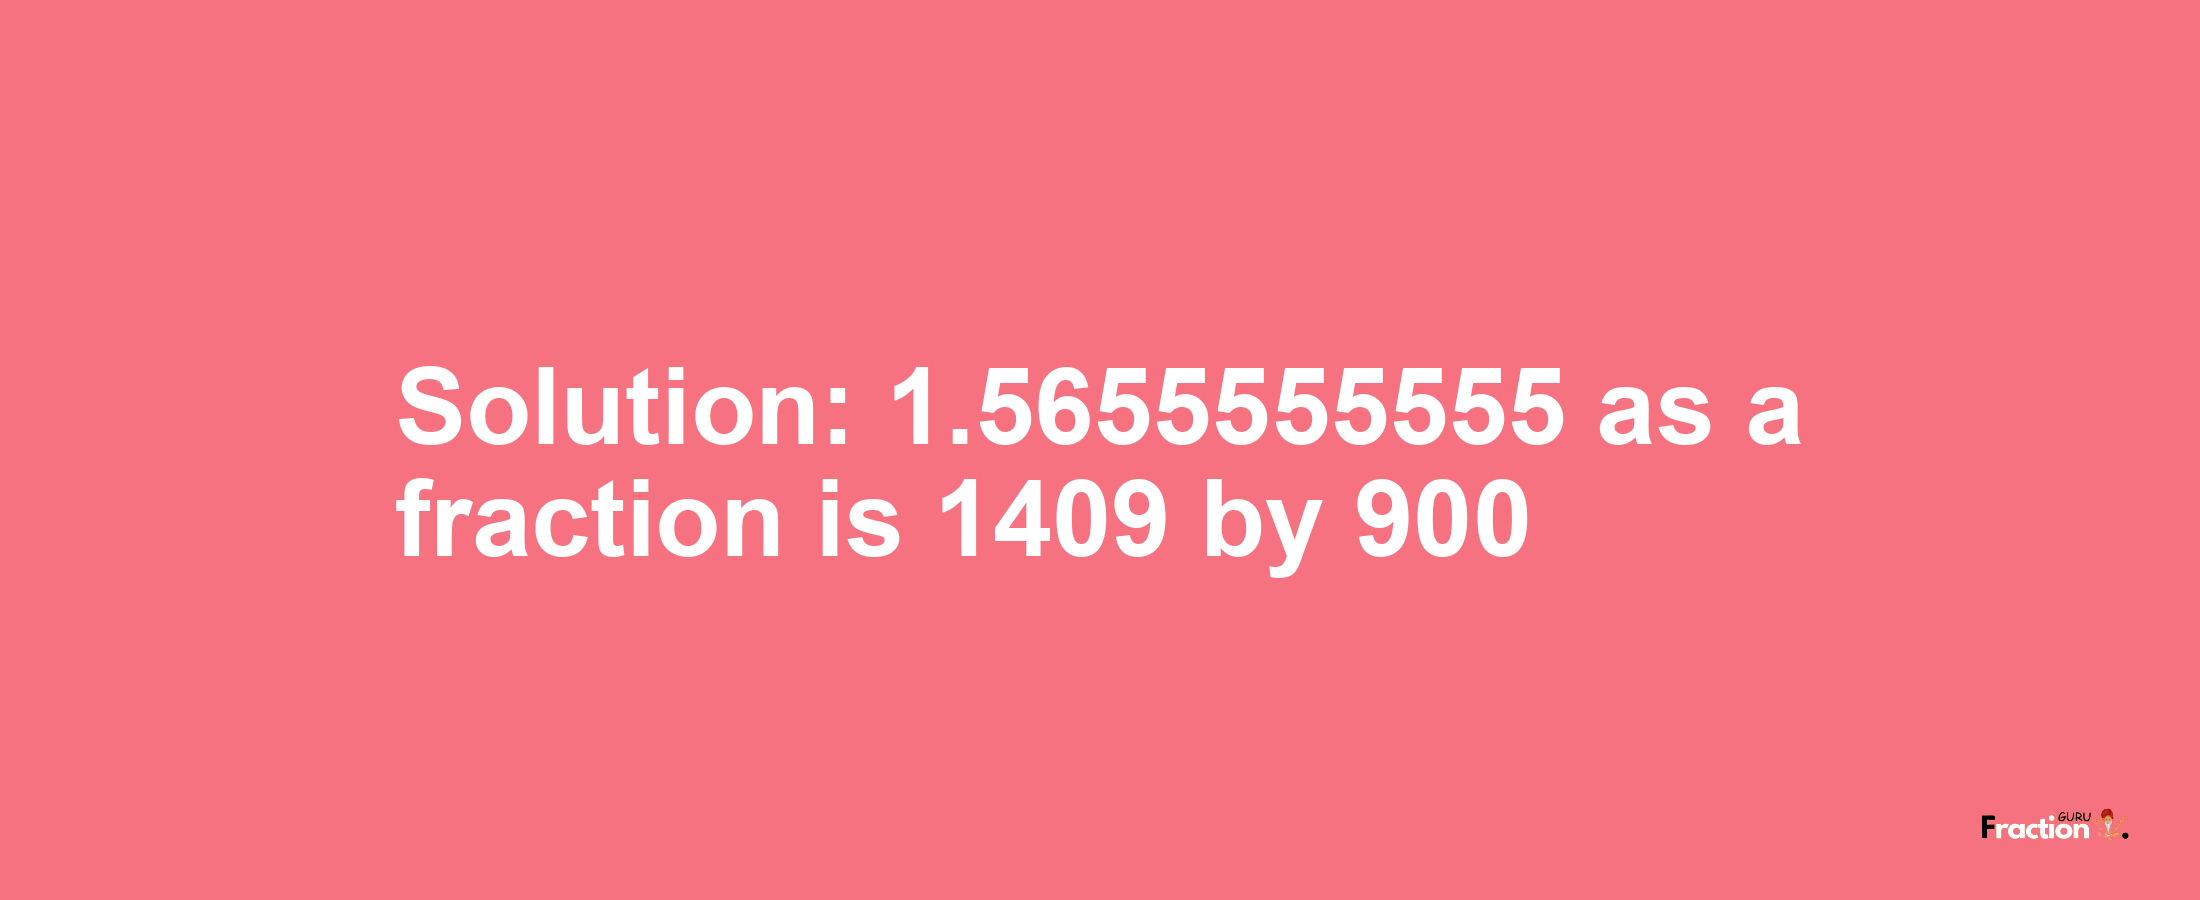 Solution:1.5655555555 as a fraction is 1409/900